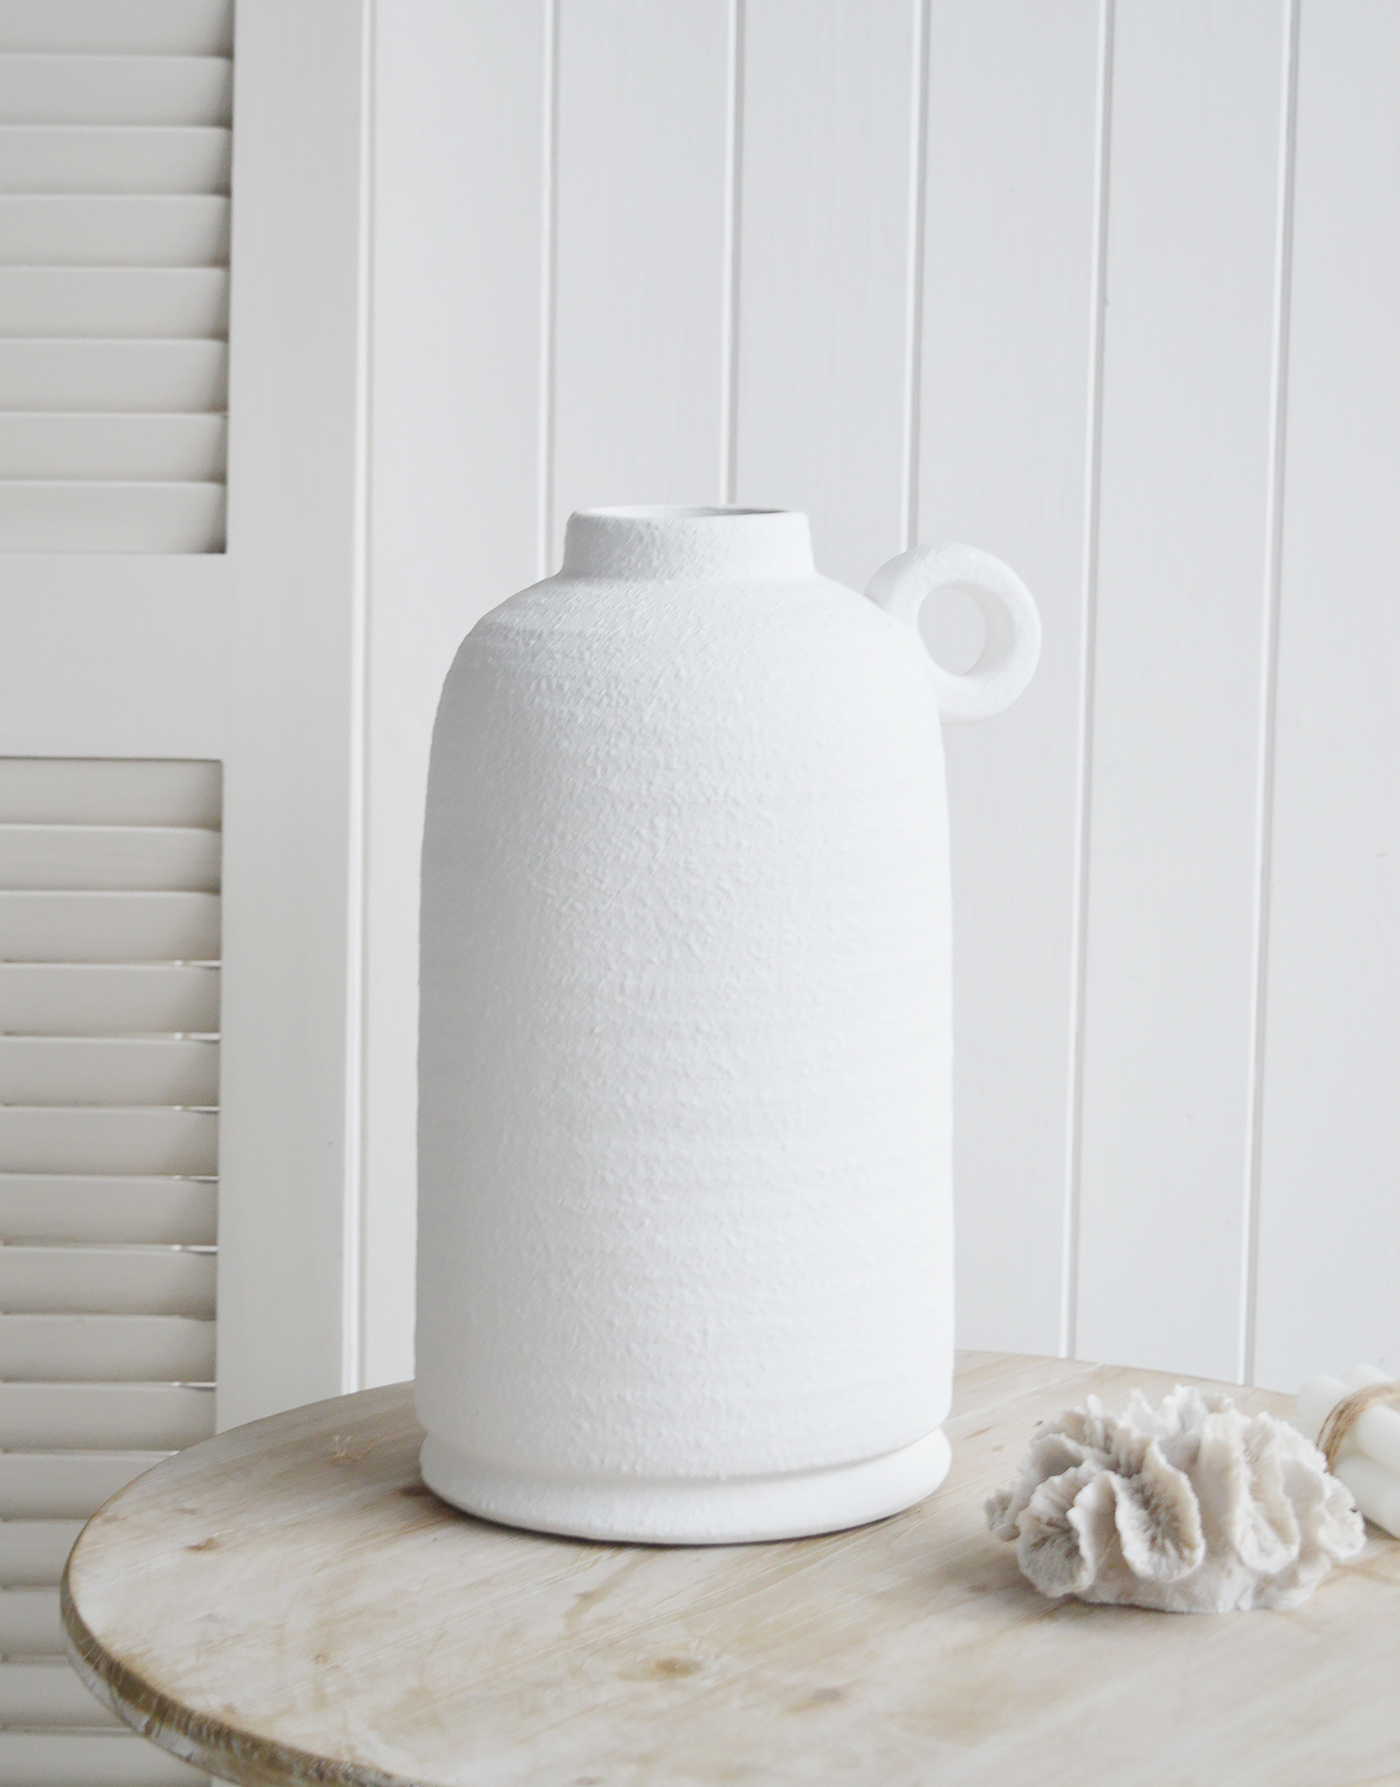 Putney White Vase  from The White Lighthouse , New England style furniture and accessories for country, coastal and modern farmhouse styled homes and interiors